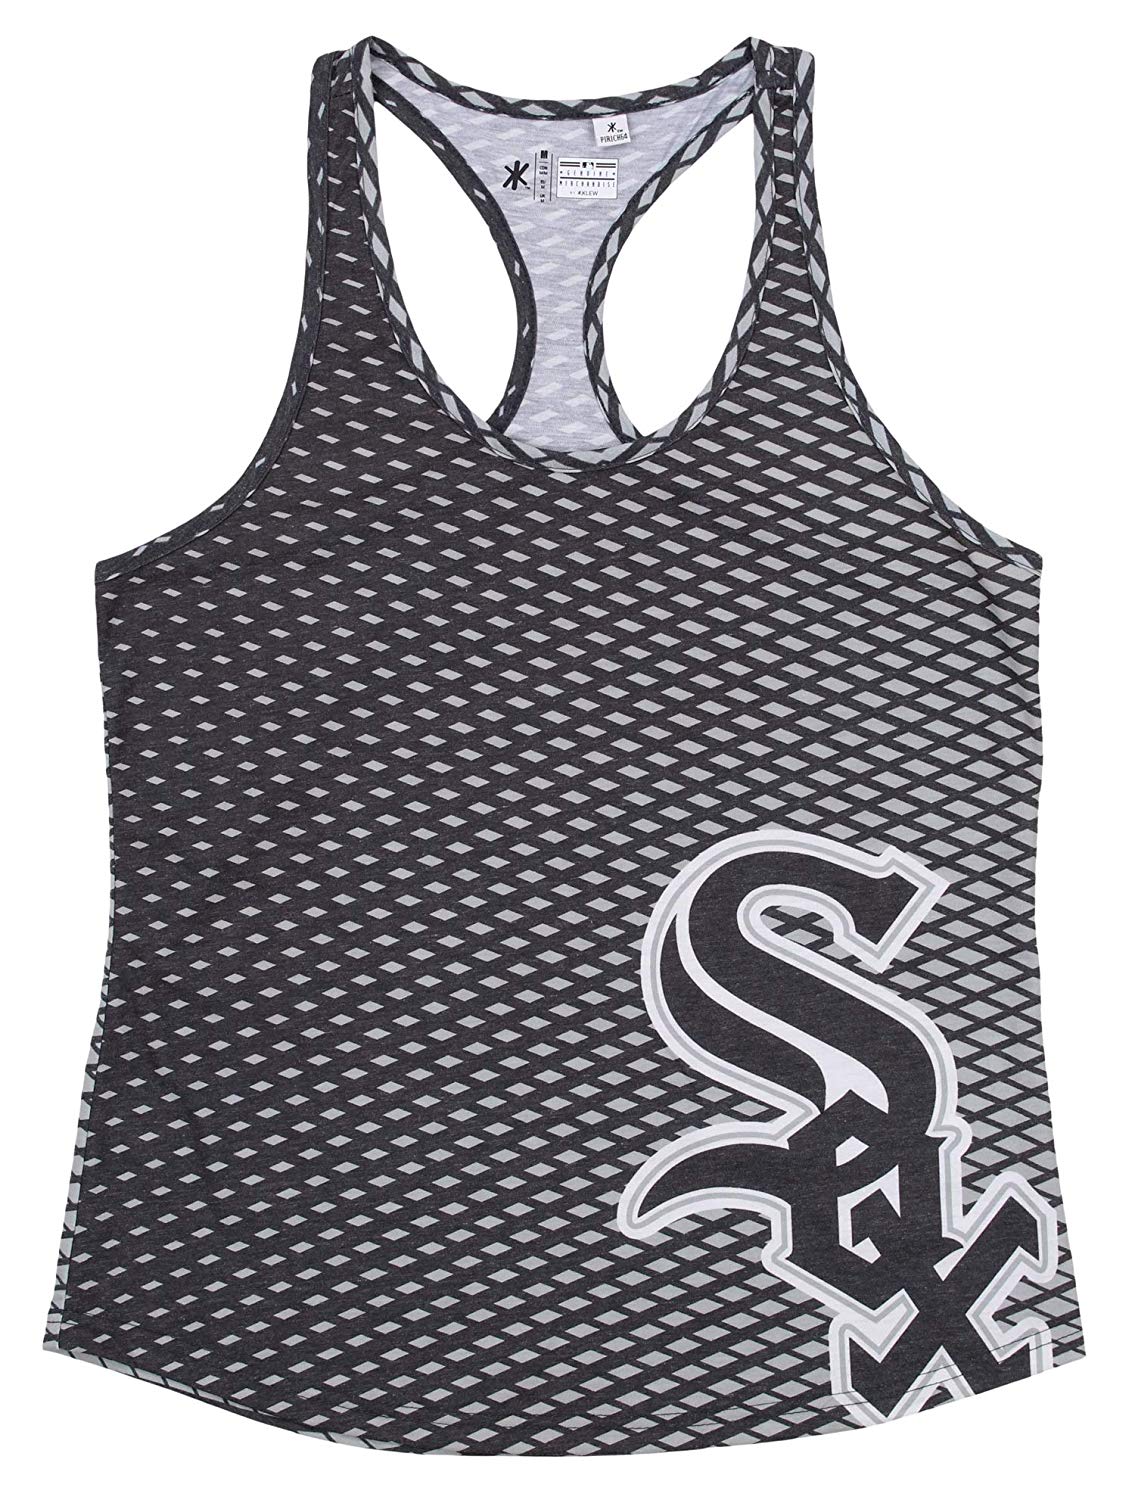 Forever Collectibles MLB Women's Chicago White Sox Diamond Racerback ...